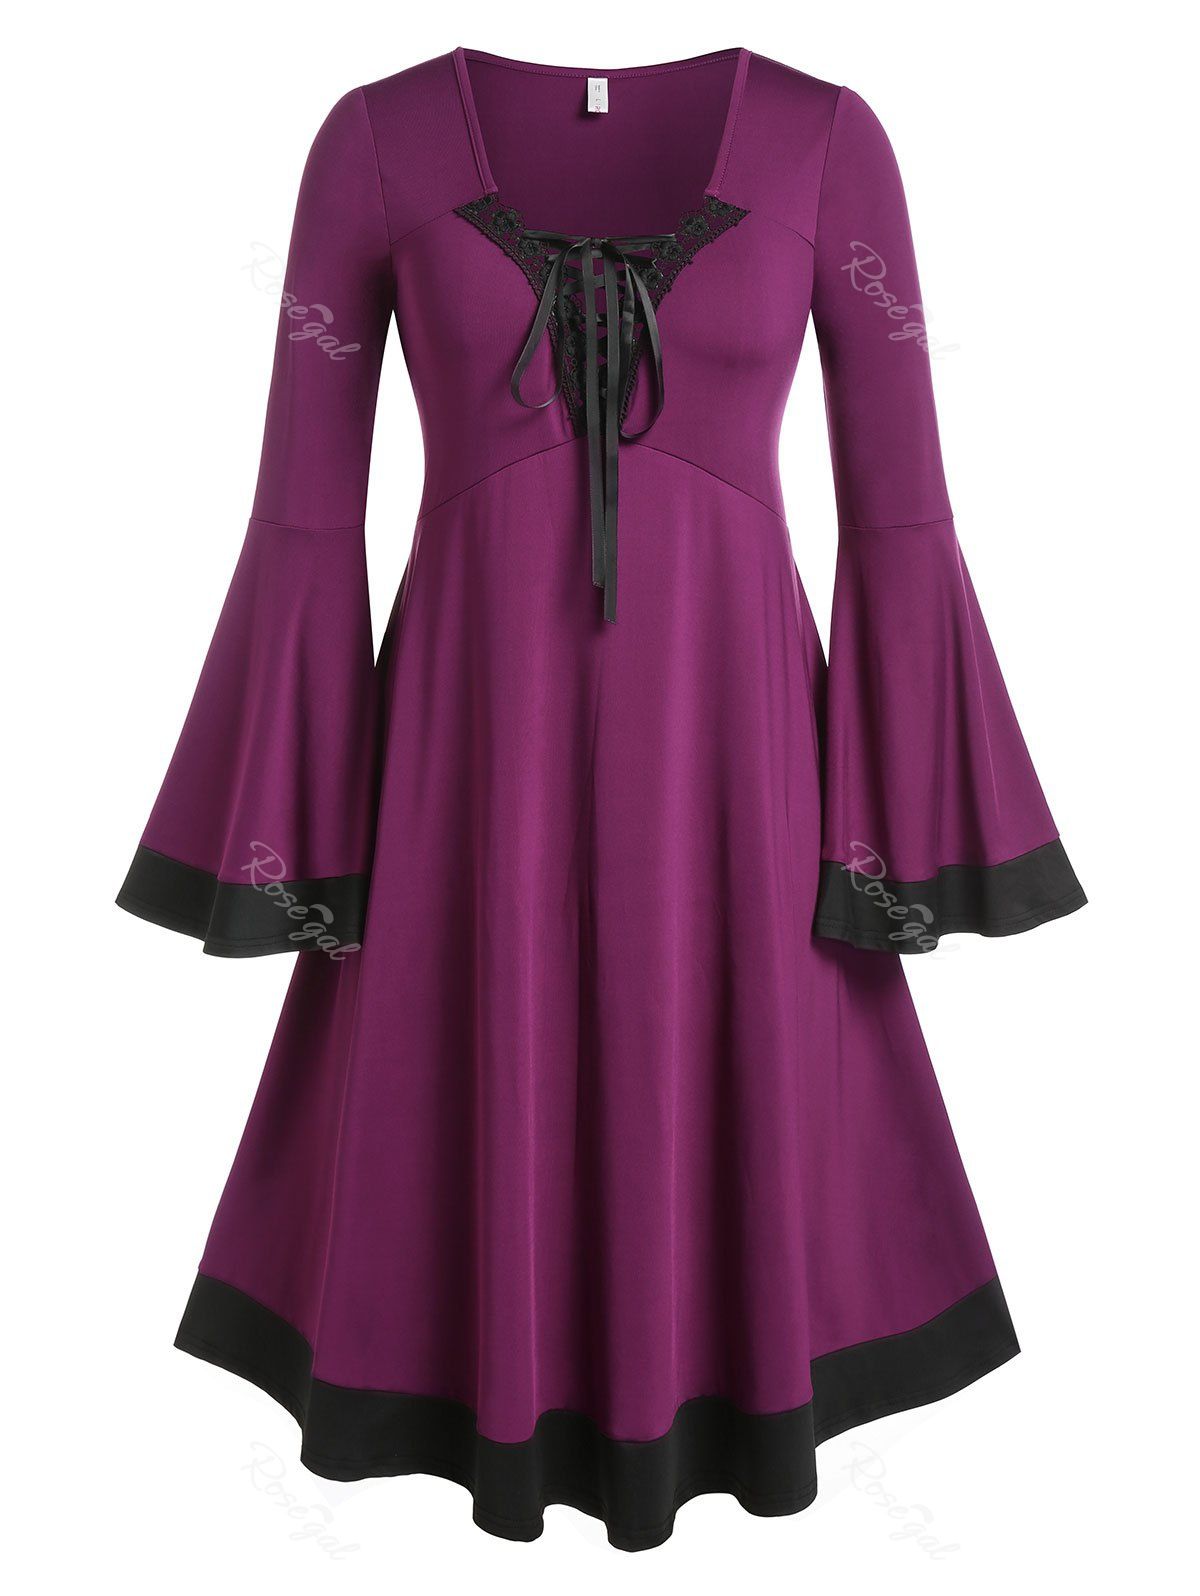 Trendy Plus Size Lace Up Floral Crochet Flare Sleeve Gothic Midi Dress  